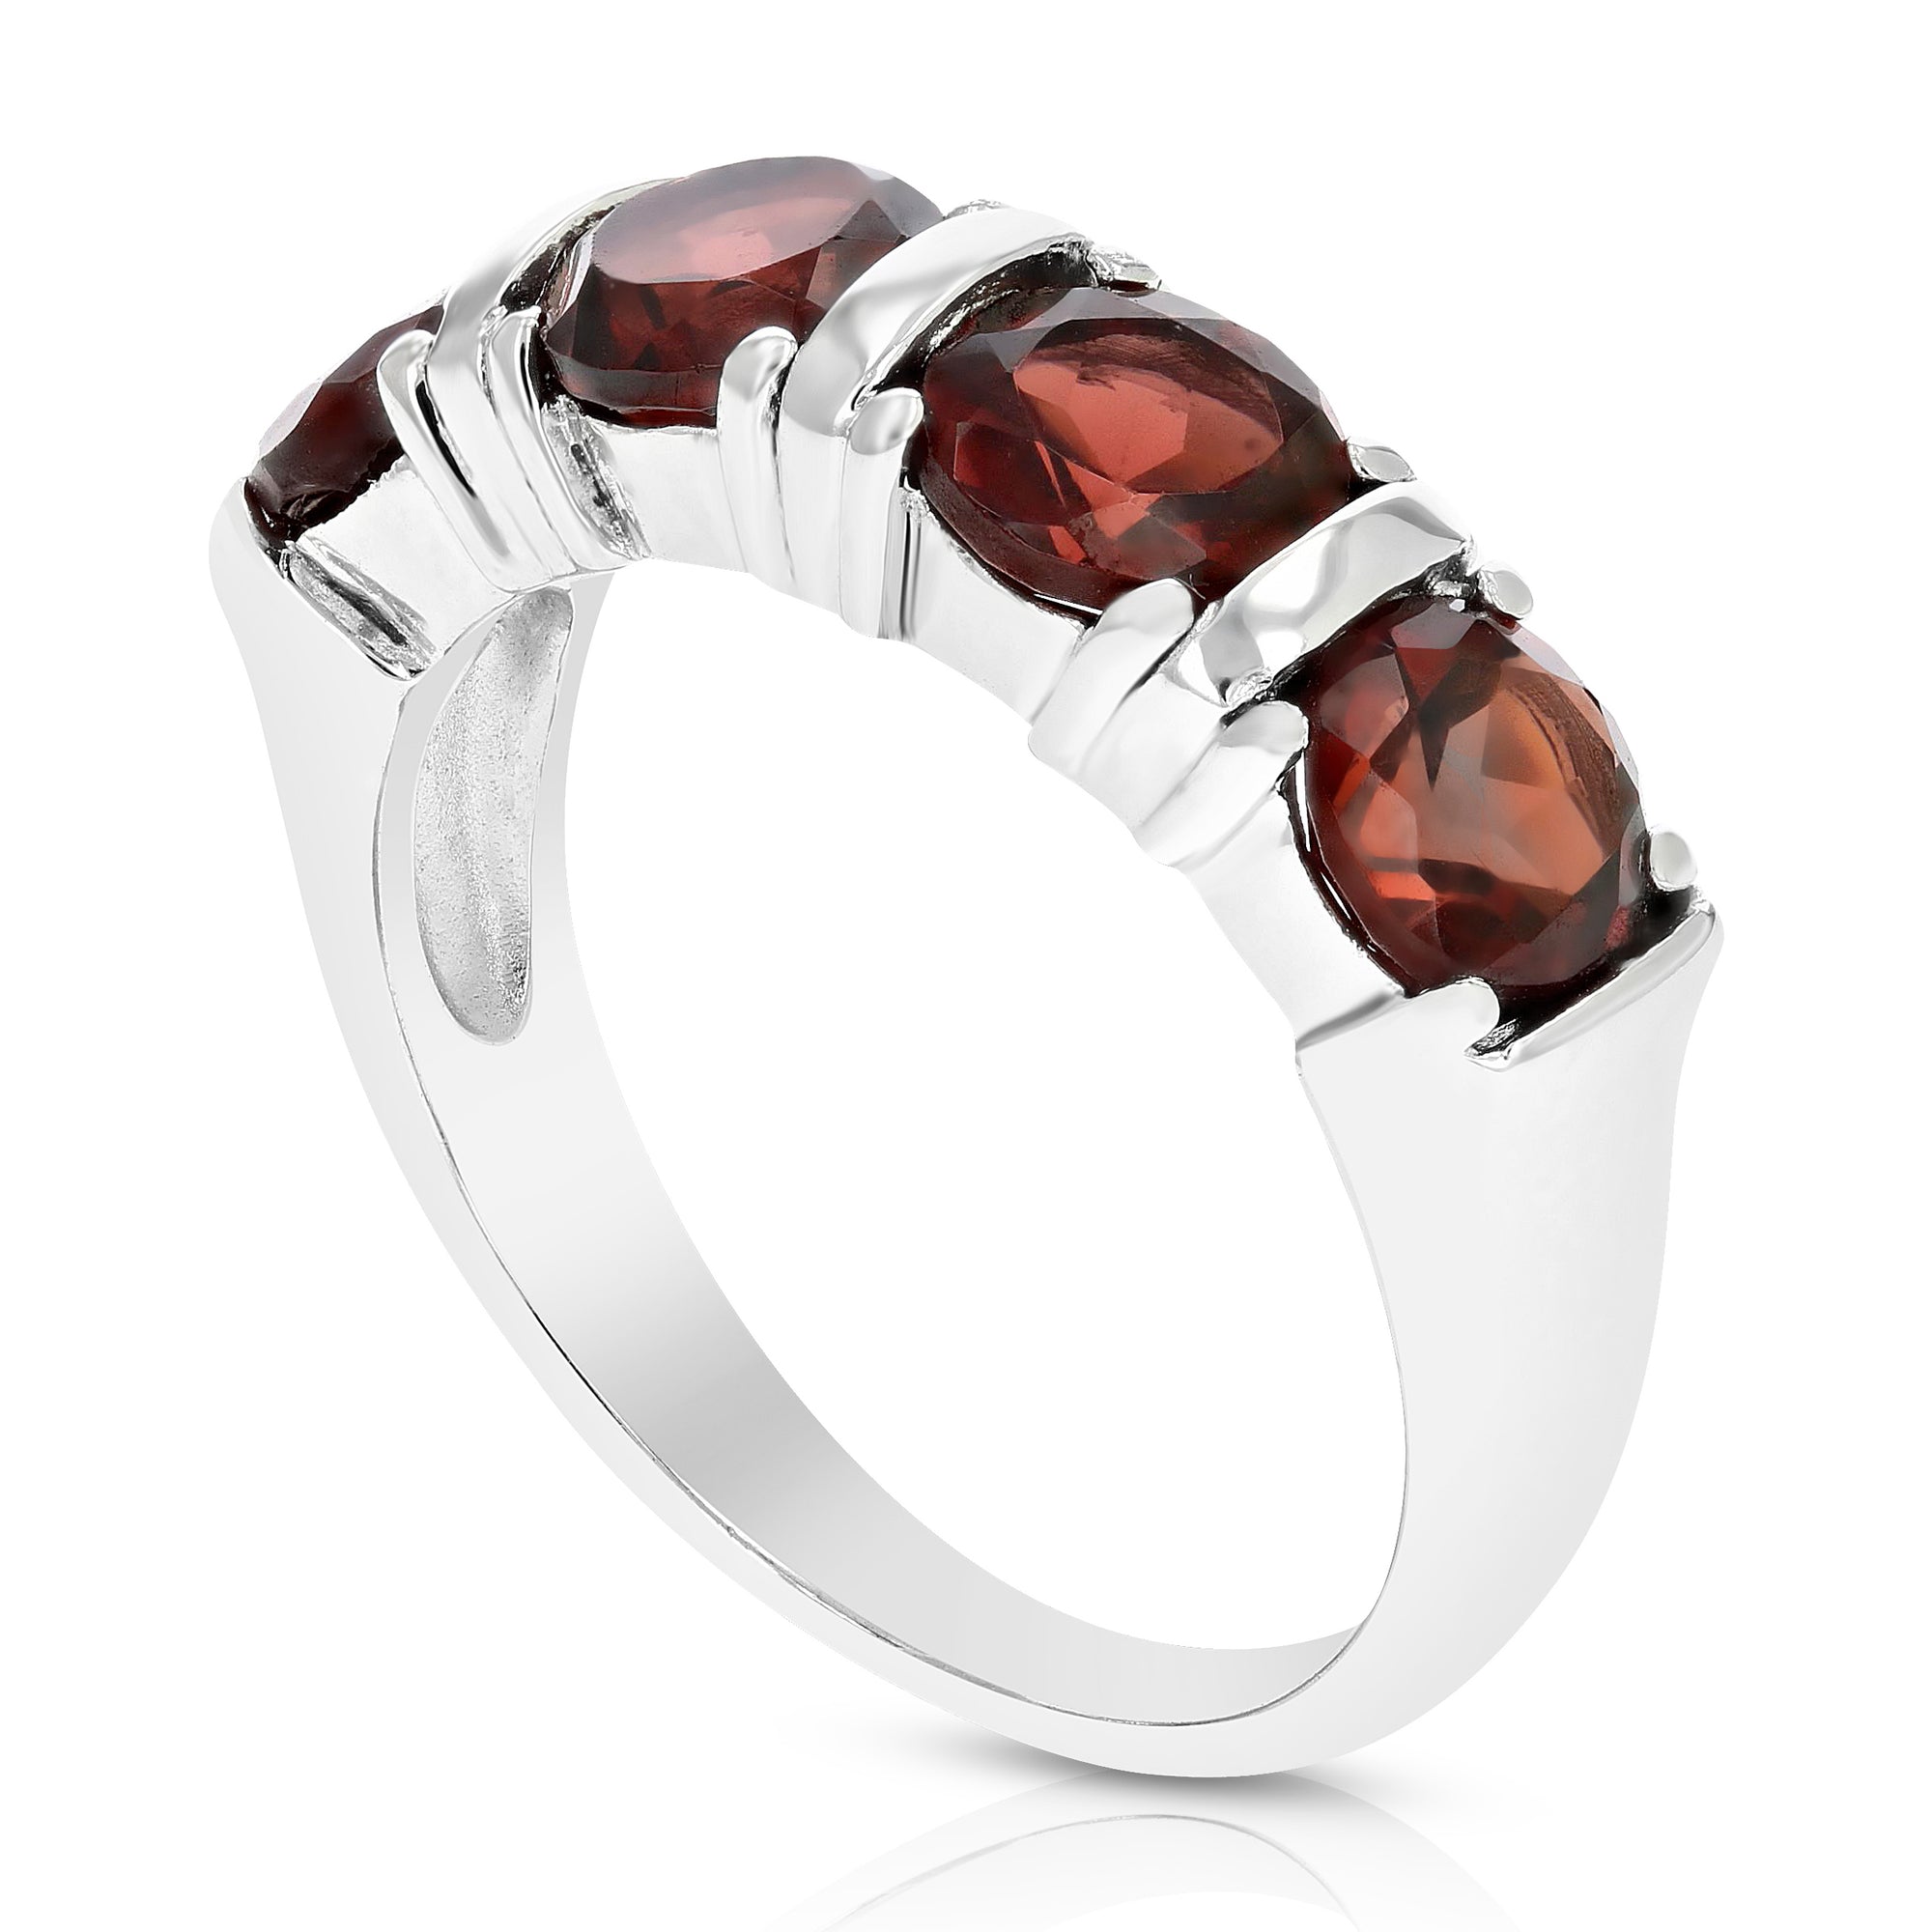 1.50 cttw Garnet Ring .925 Sterling Silver with Rhodium Plating Round Shape 5 MM